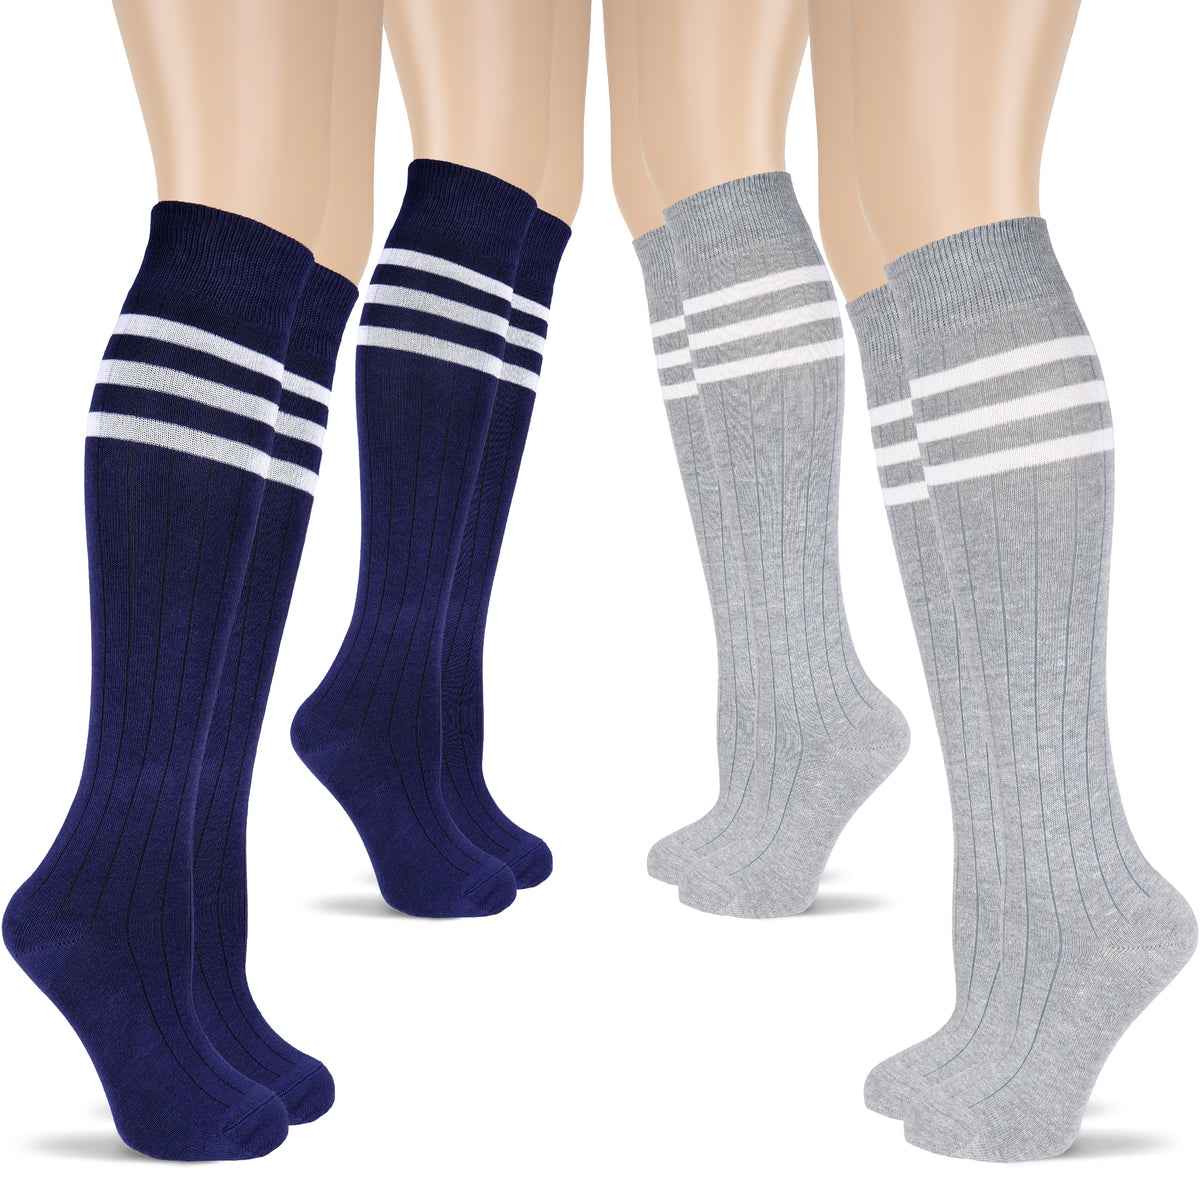 The image displays four pairs of Women's Striped Cotton Dress Knee-High Socks with blue and white stripes.